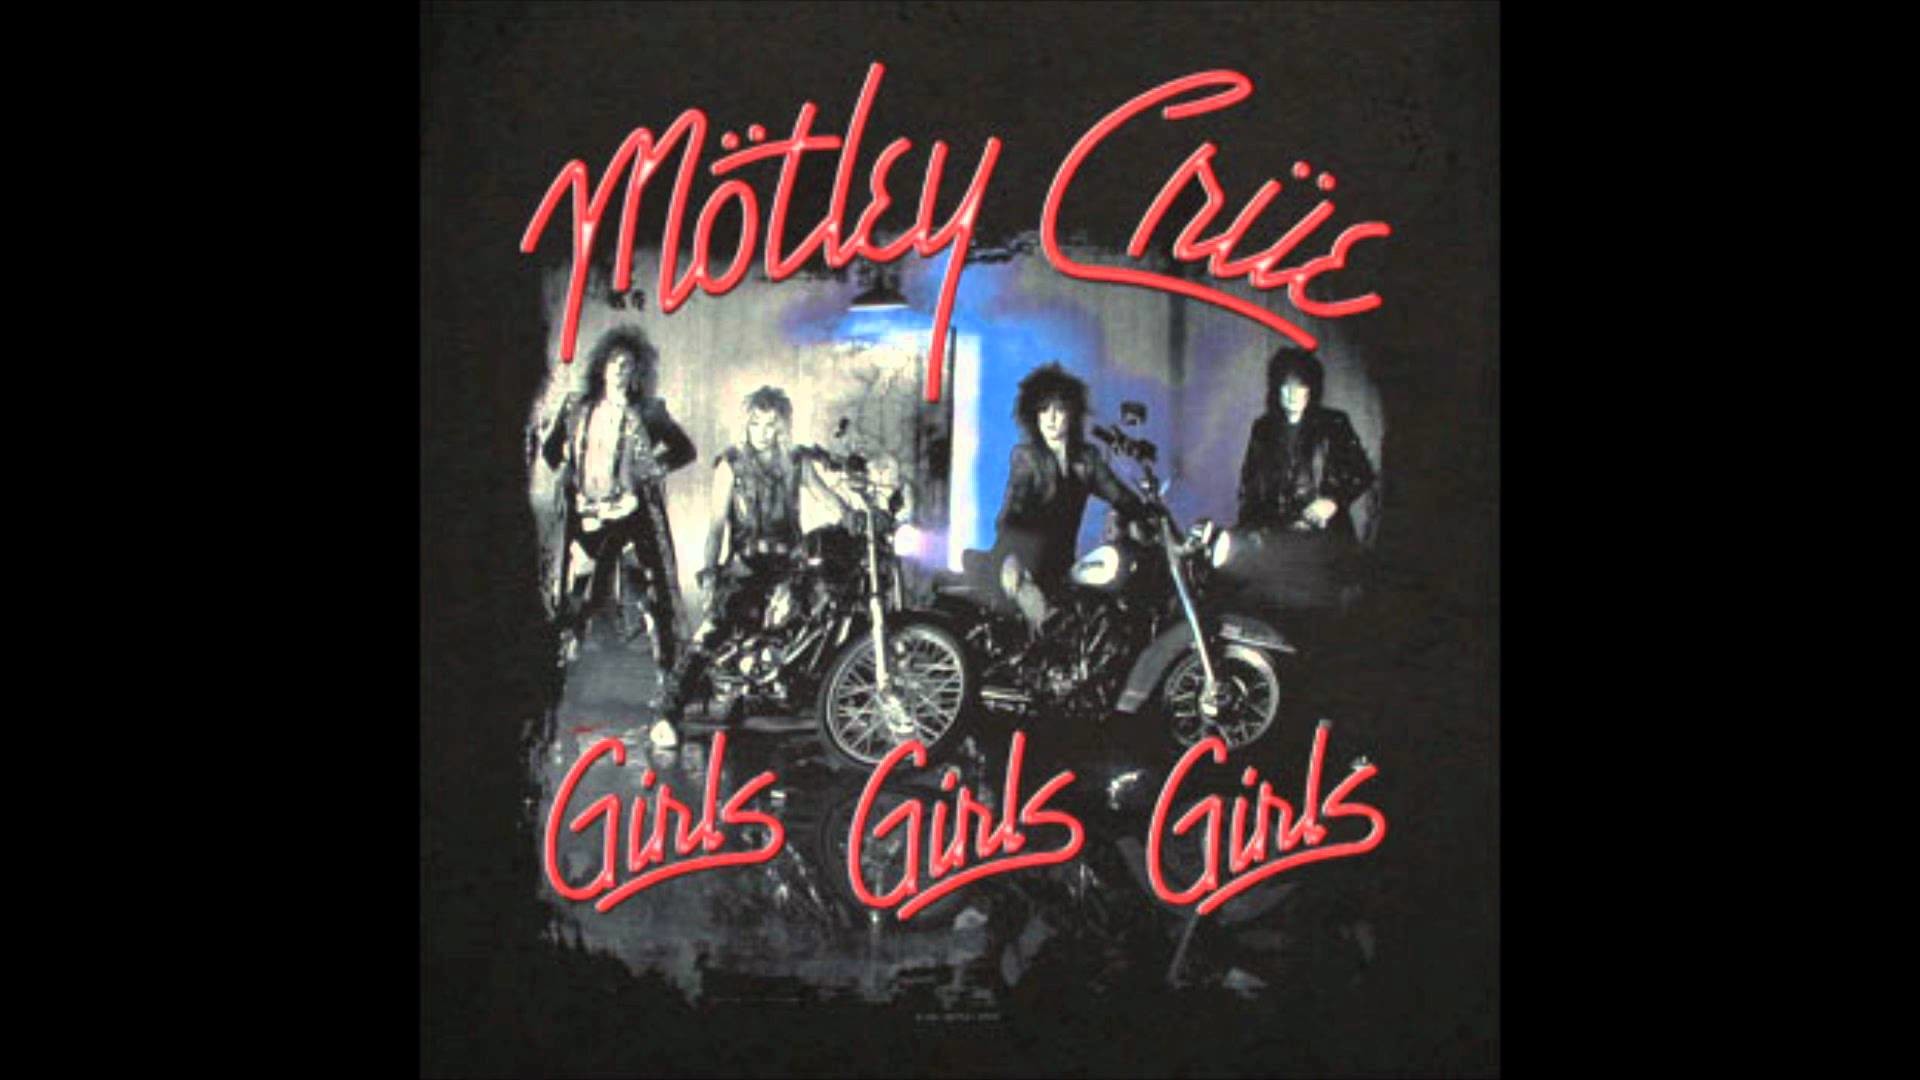 Motley Crue Wallpaper Logo - And they just came here on their big tour